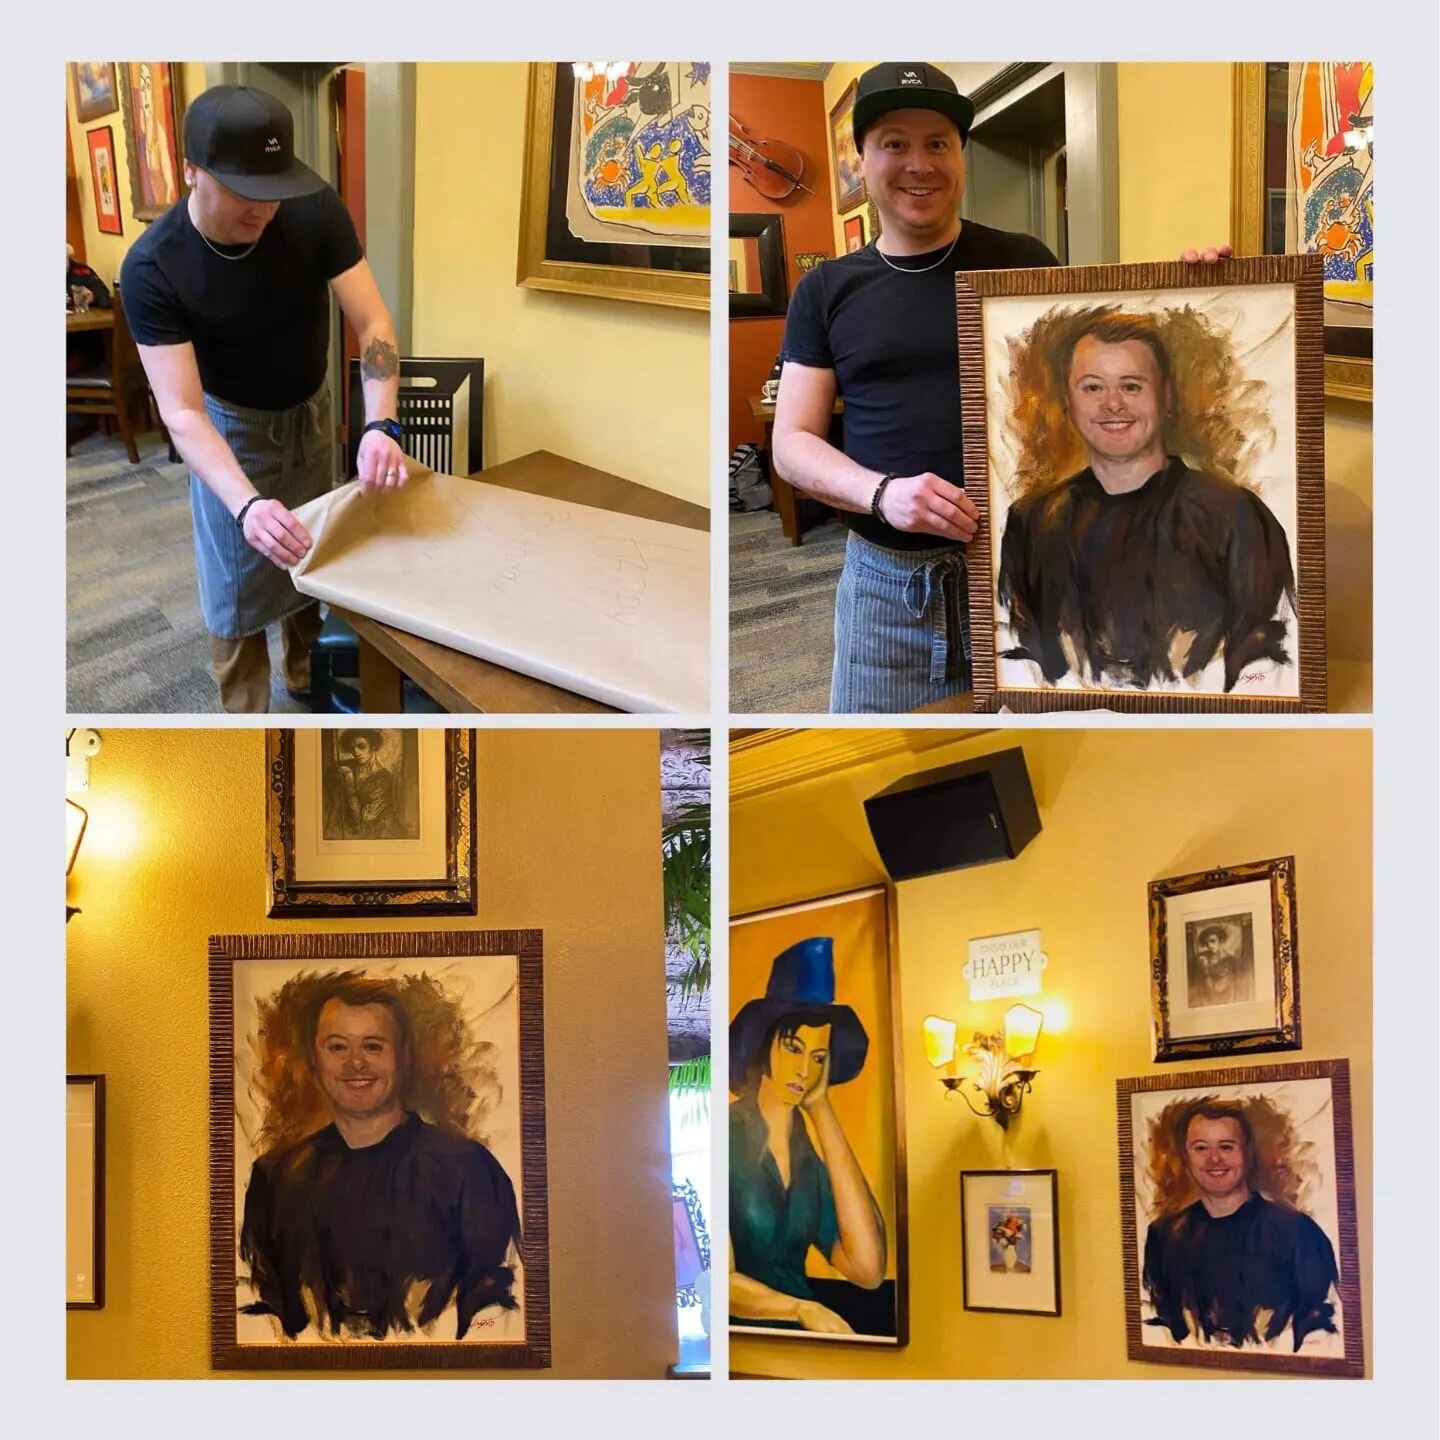 Tim is incredibly talented, humble and passionate. Was a pleasure and honor to be commissioned to paint their portrait and to have it hang in Dodicis amongst such great artworks.
-
-
Posted from Cafe Dodici's post on FB
-
&quot;For his birthday recen